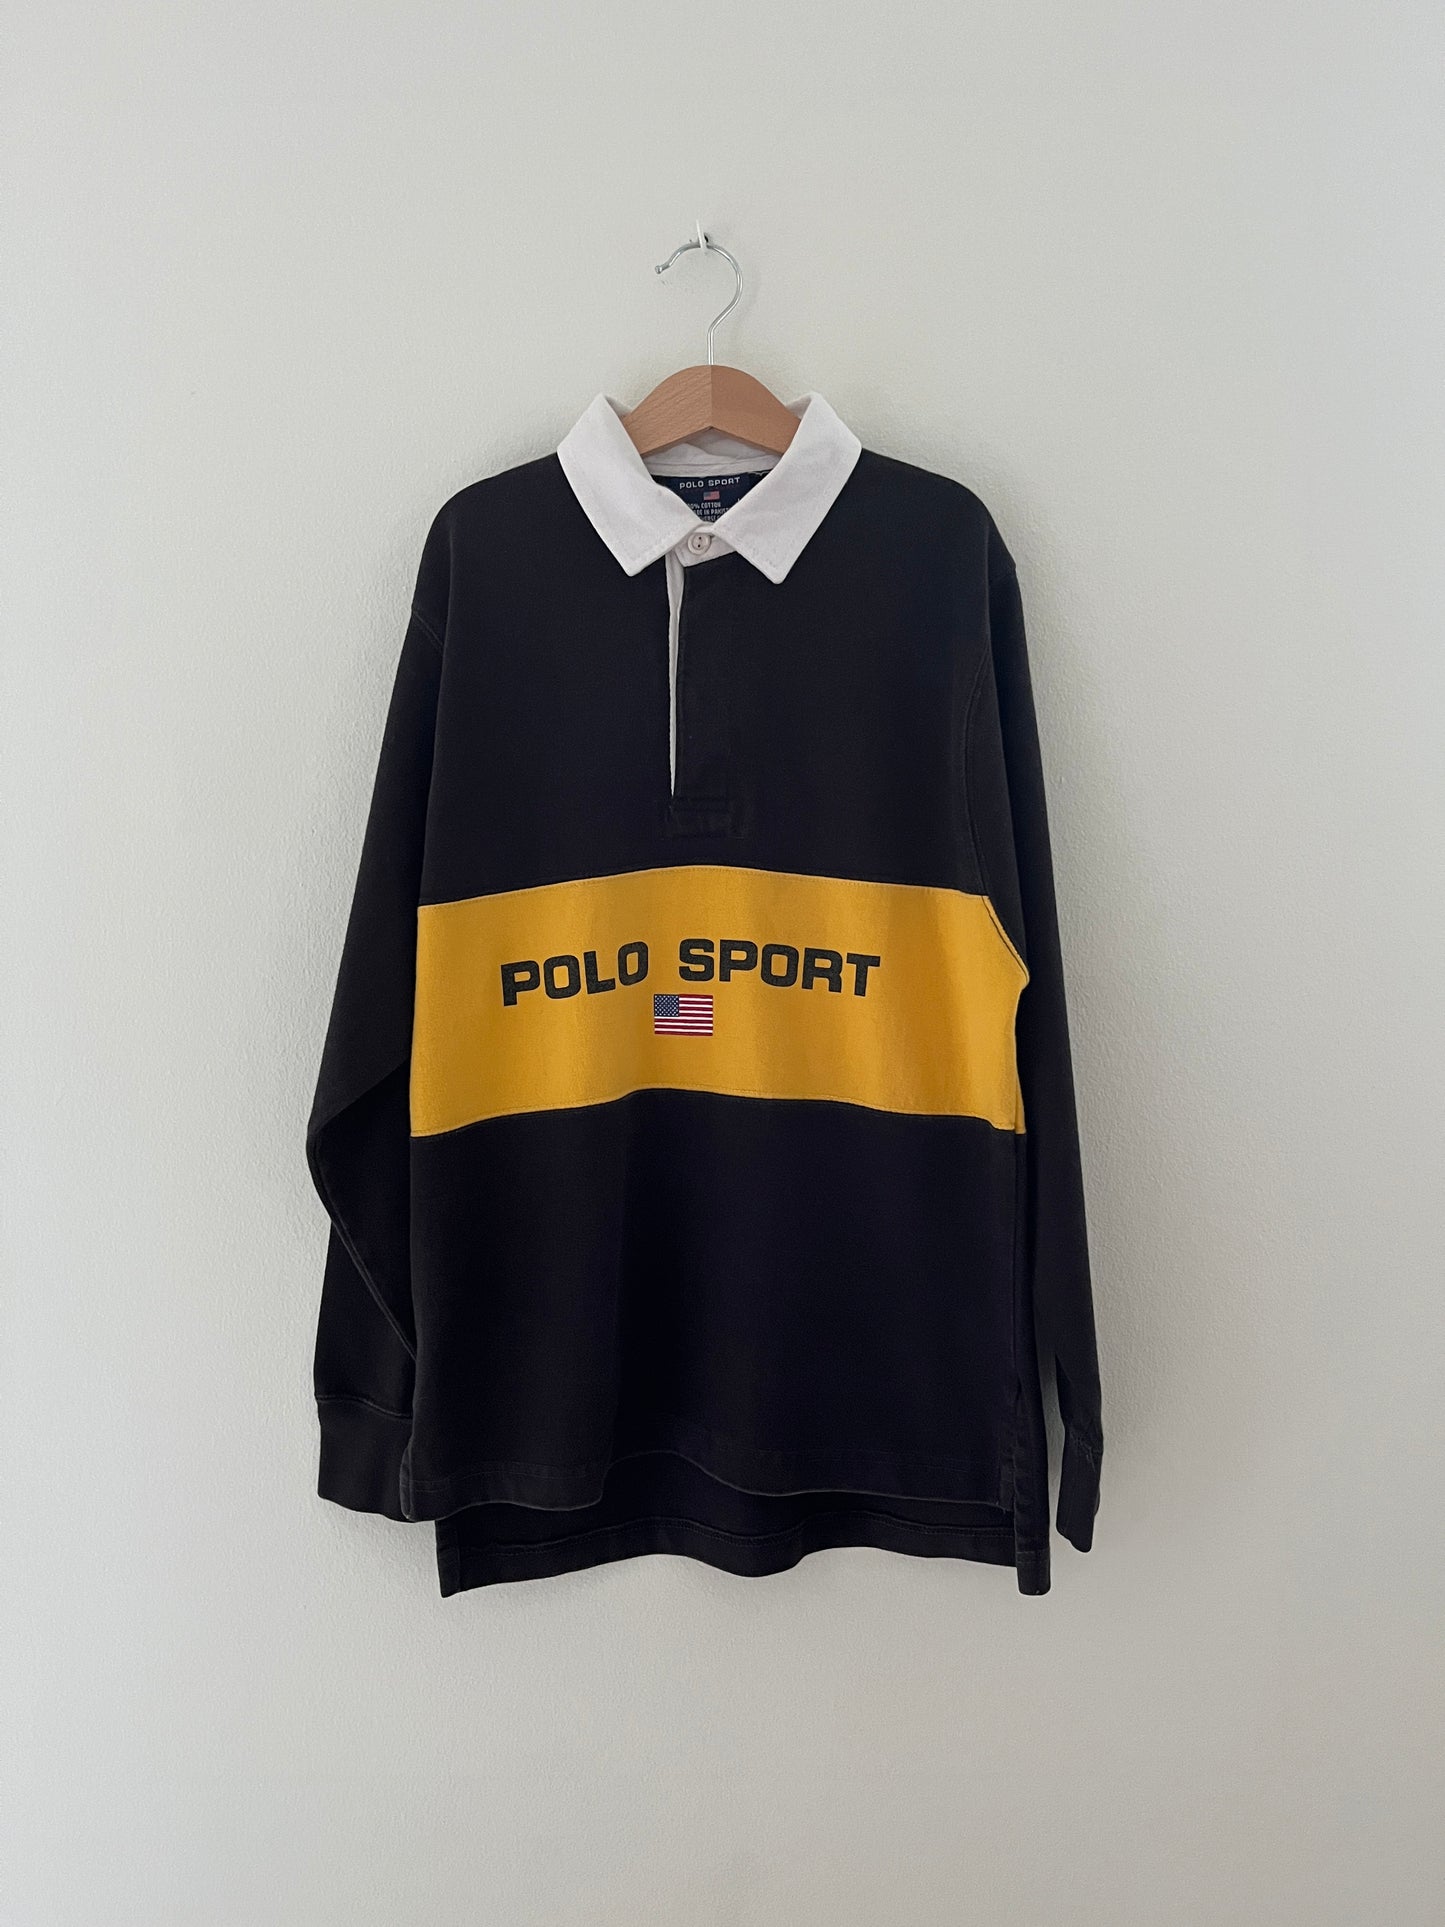 Rugby shirt, 146/152